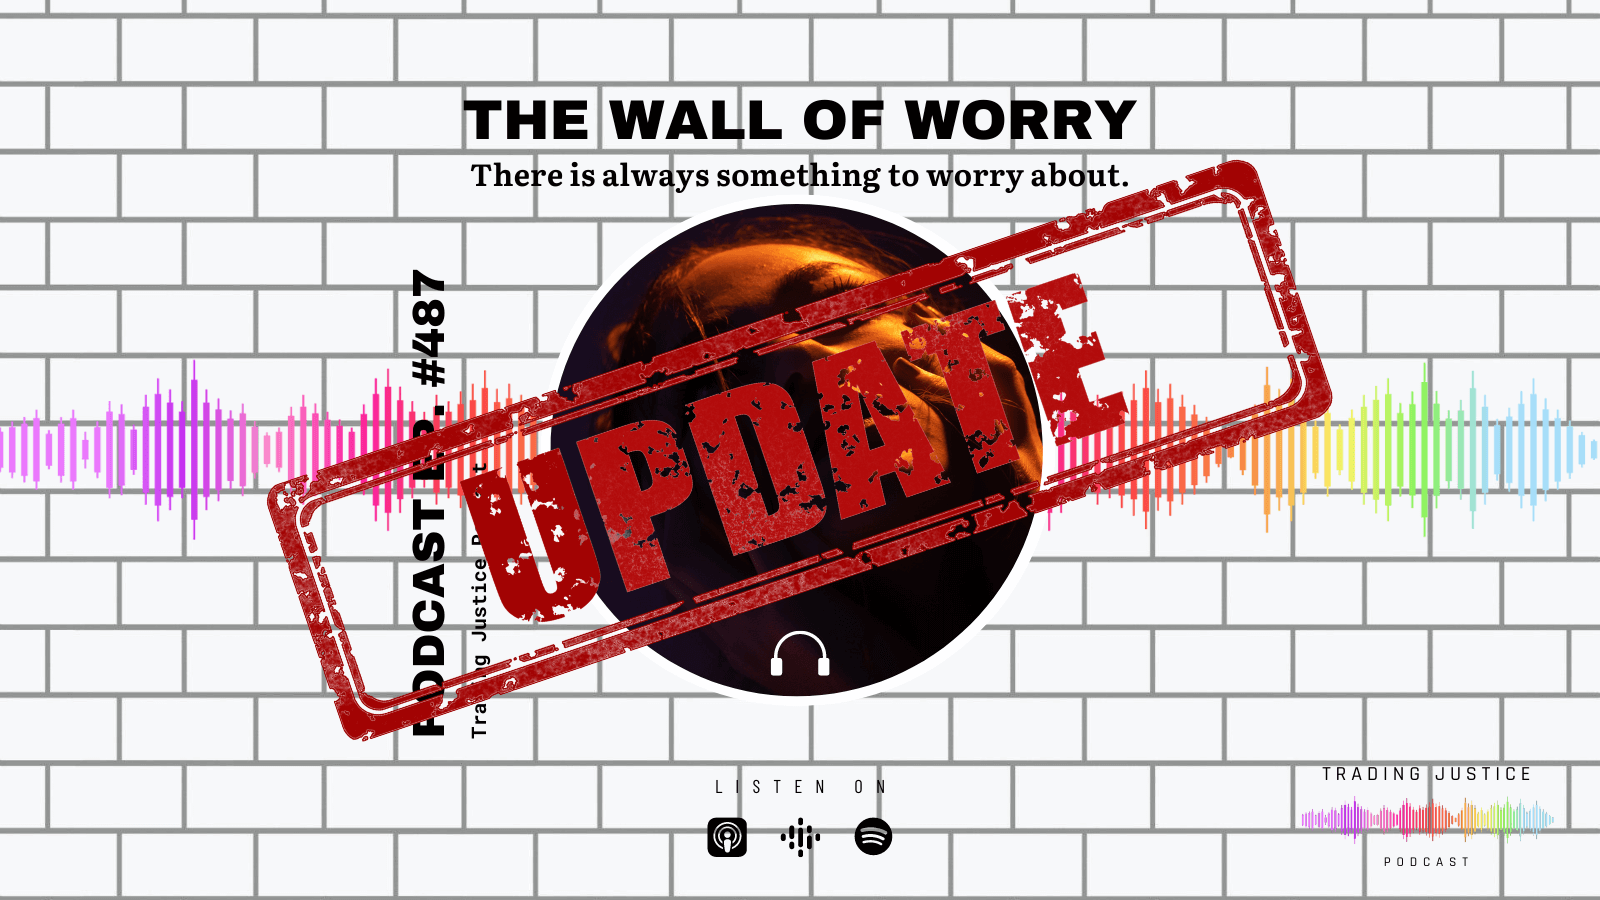 Trading Justice 487: The Wall of Worry Update